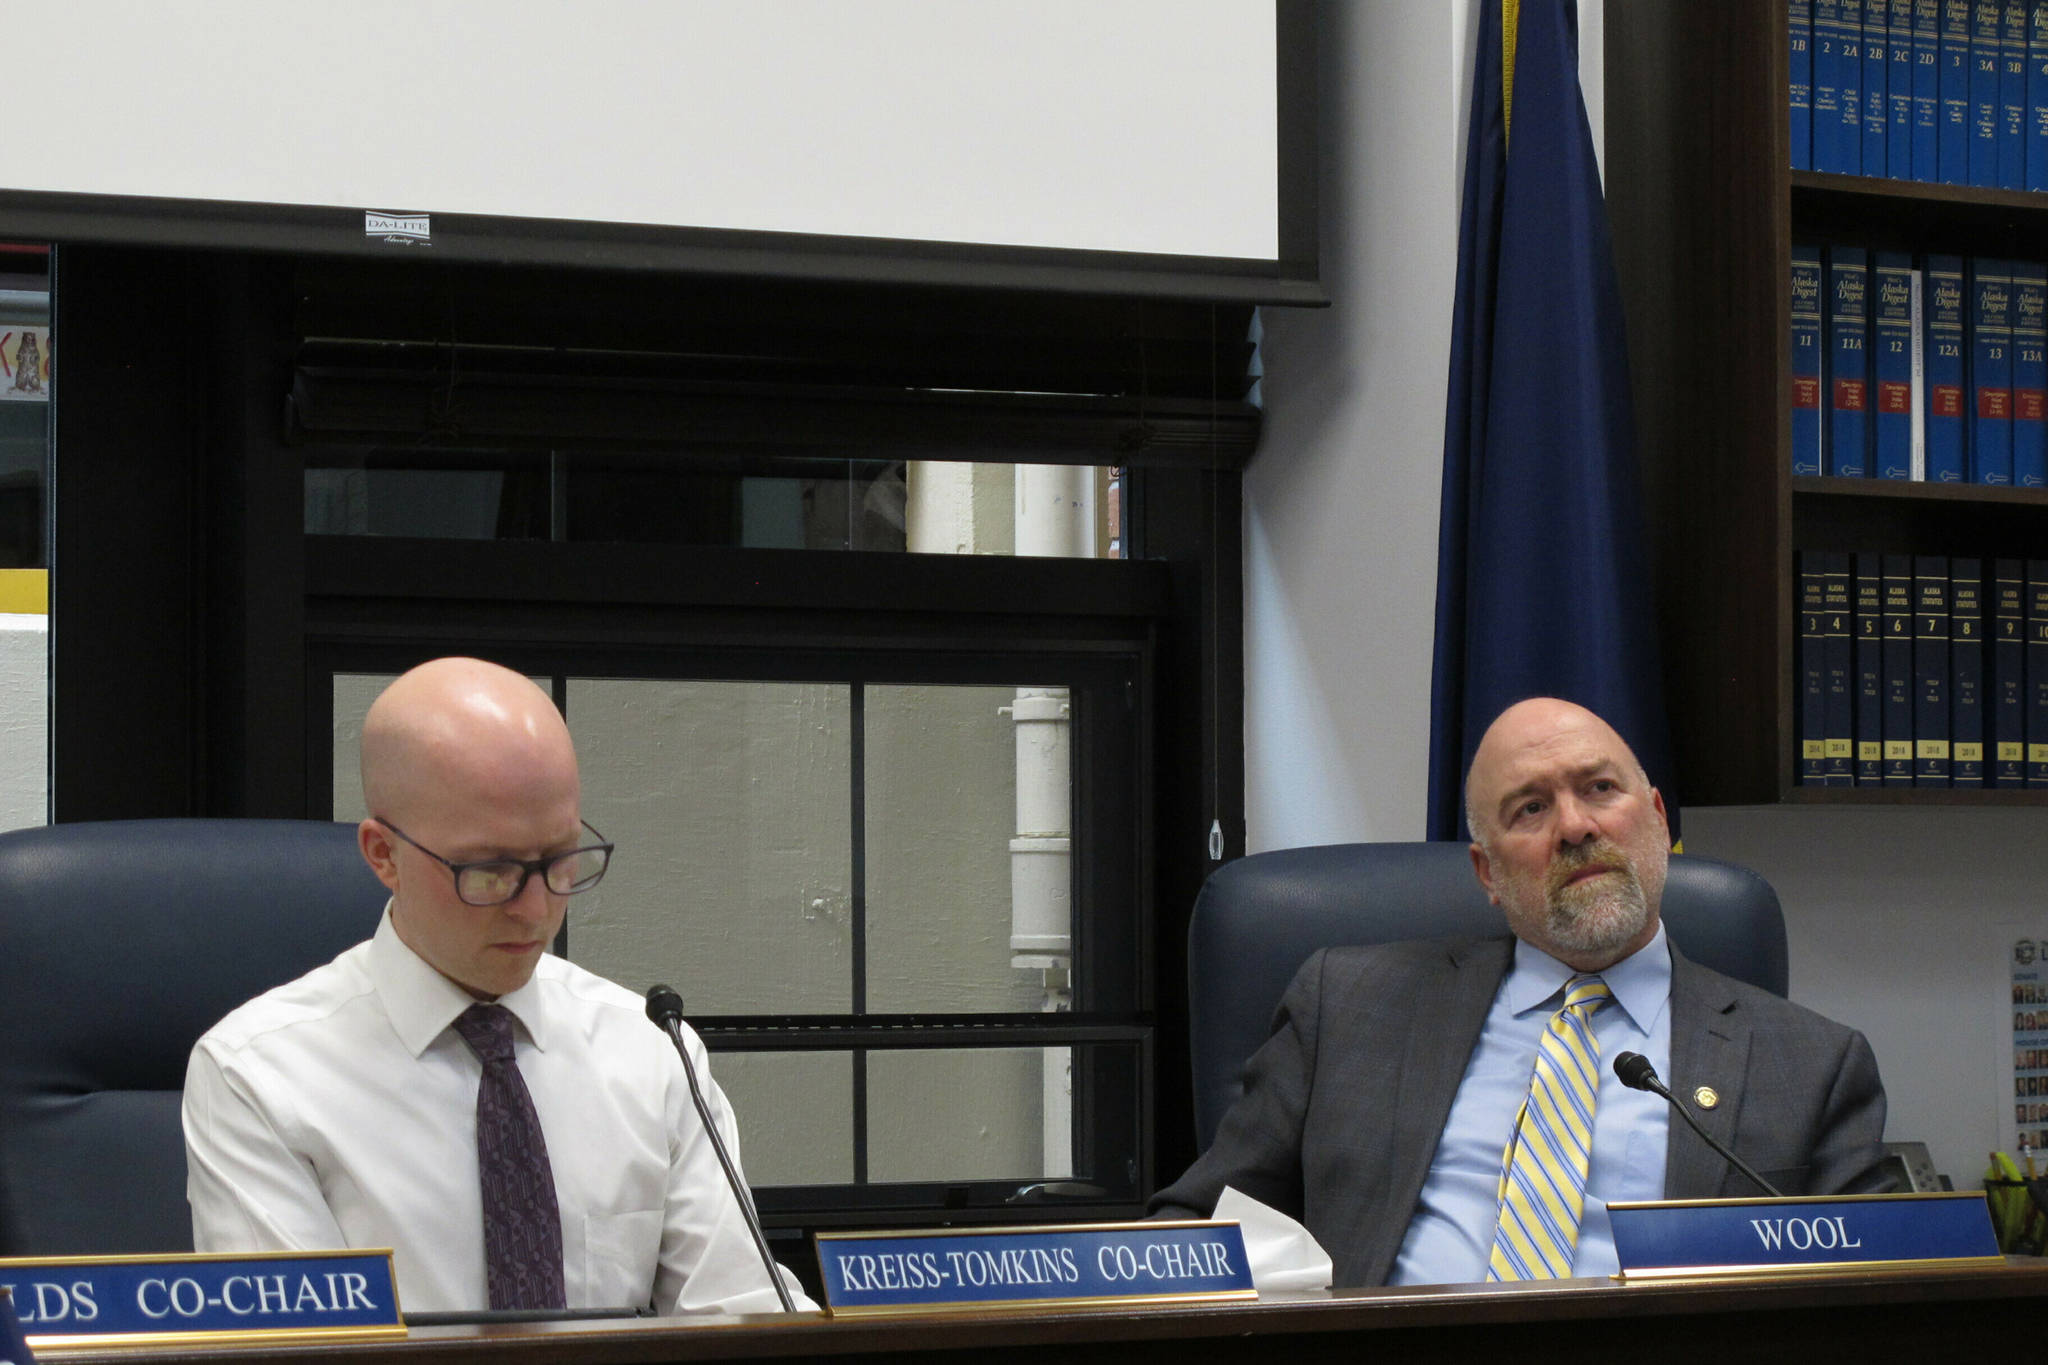 Alaska state Rep. Adam Wool, right, listens to testimony given by phone on the nomination of Amanda Price to be state Public Safety commissioner on Thursday, April 11, 2019, in Juneau, Alaska. Also shown is Rep. Jonathan Kreiss-Tomkins. (Becky Bohrer | The Associated Press)